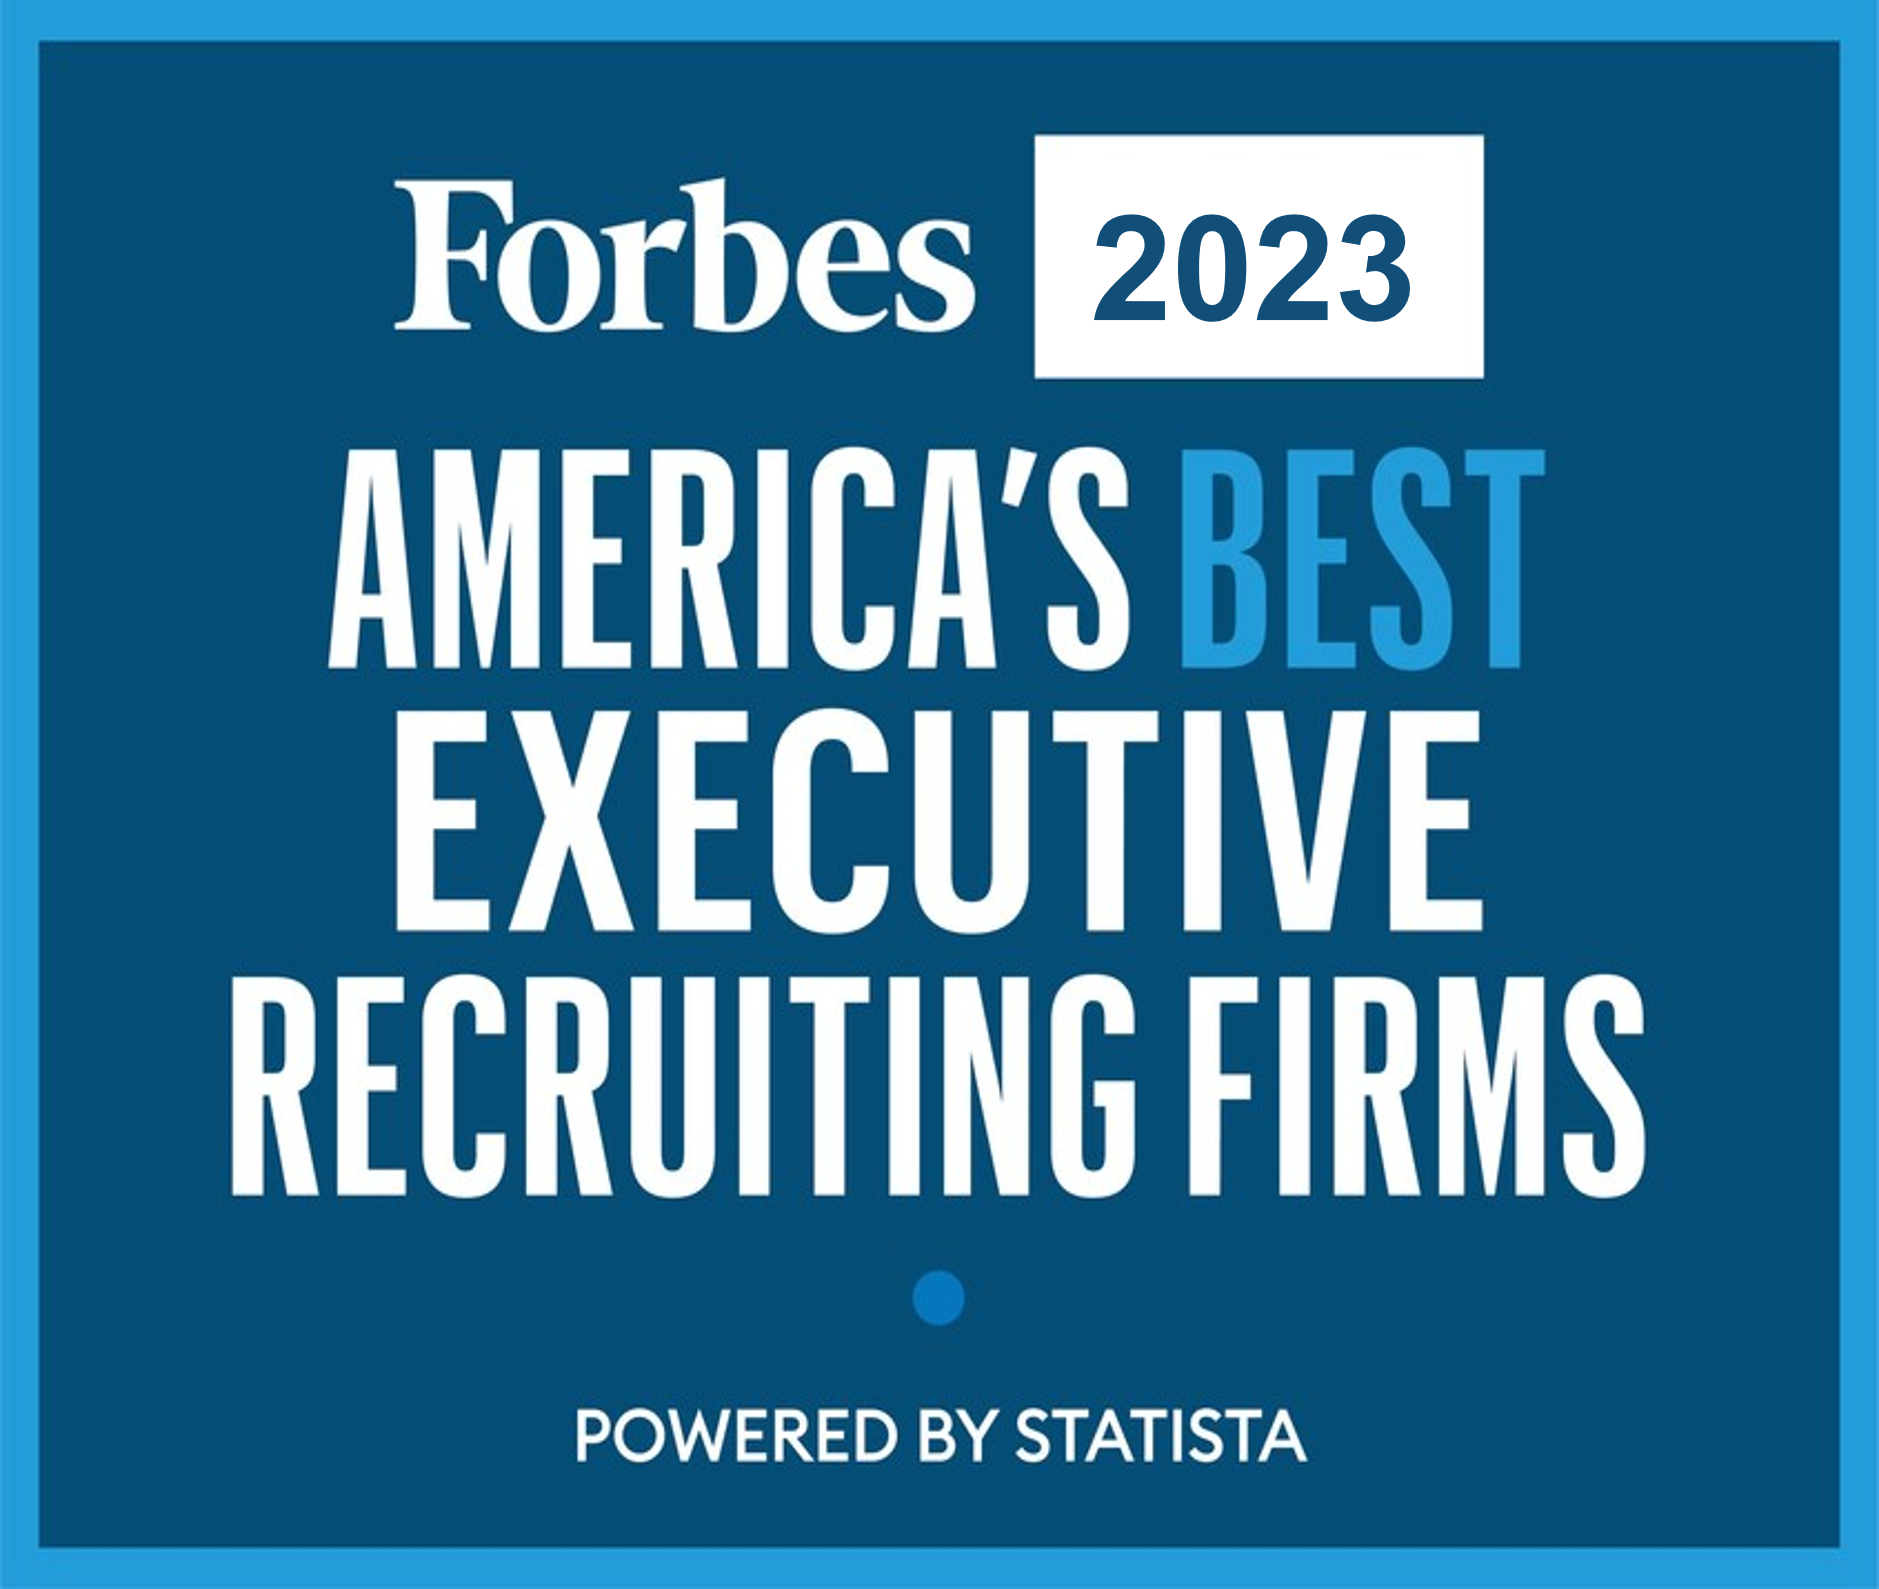 20/20 Foresight Ranked No. 11 on Forbes list of America’s Best Executive Recruiting Firms 2023 Featured Image